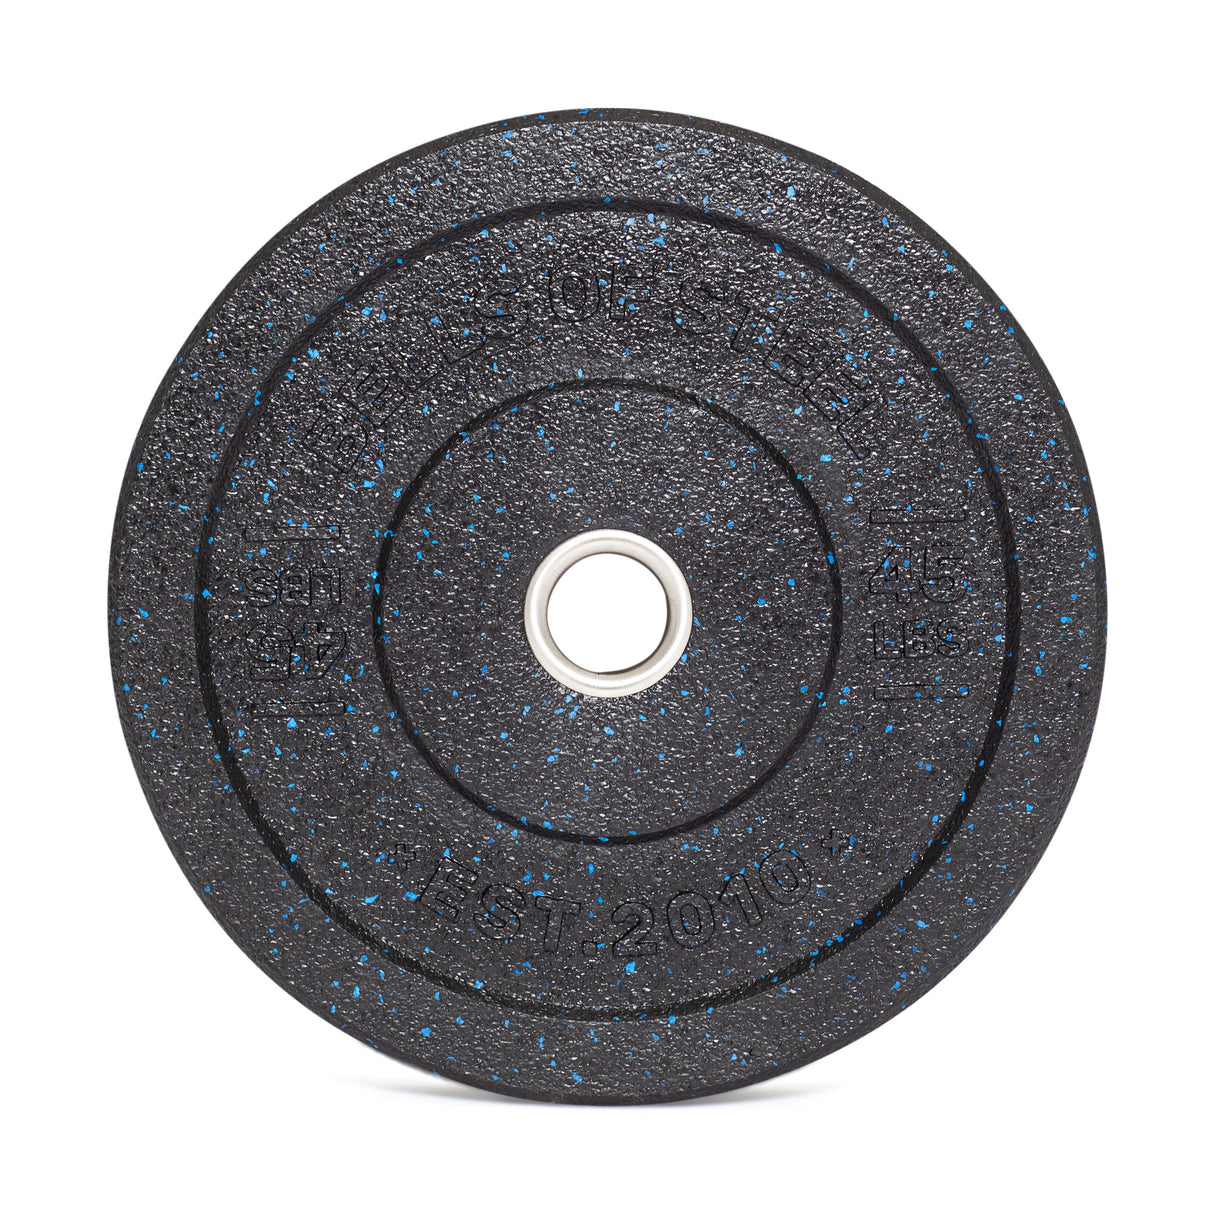 Crumb Bumper Plates for weightlifting front view